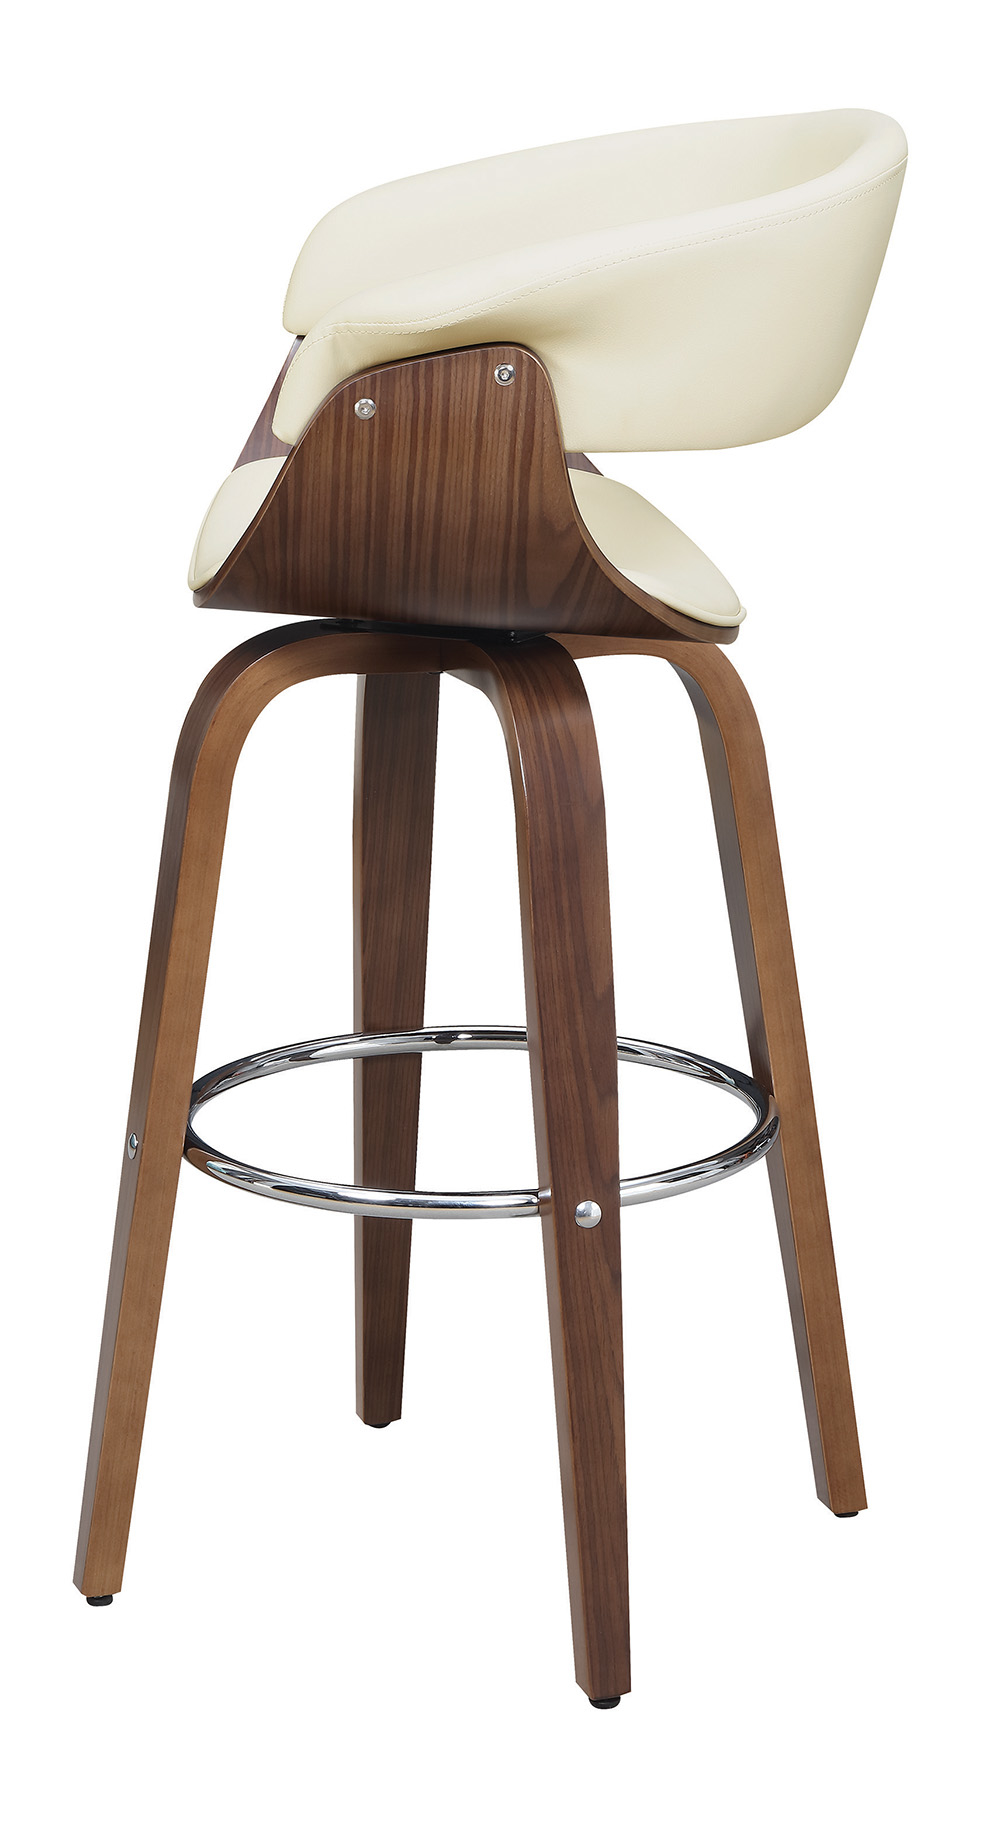 Contemporary Cream Upholstered Bar Stool with Walnut Finish by Coaster 100206 